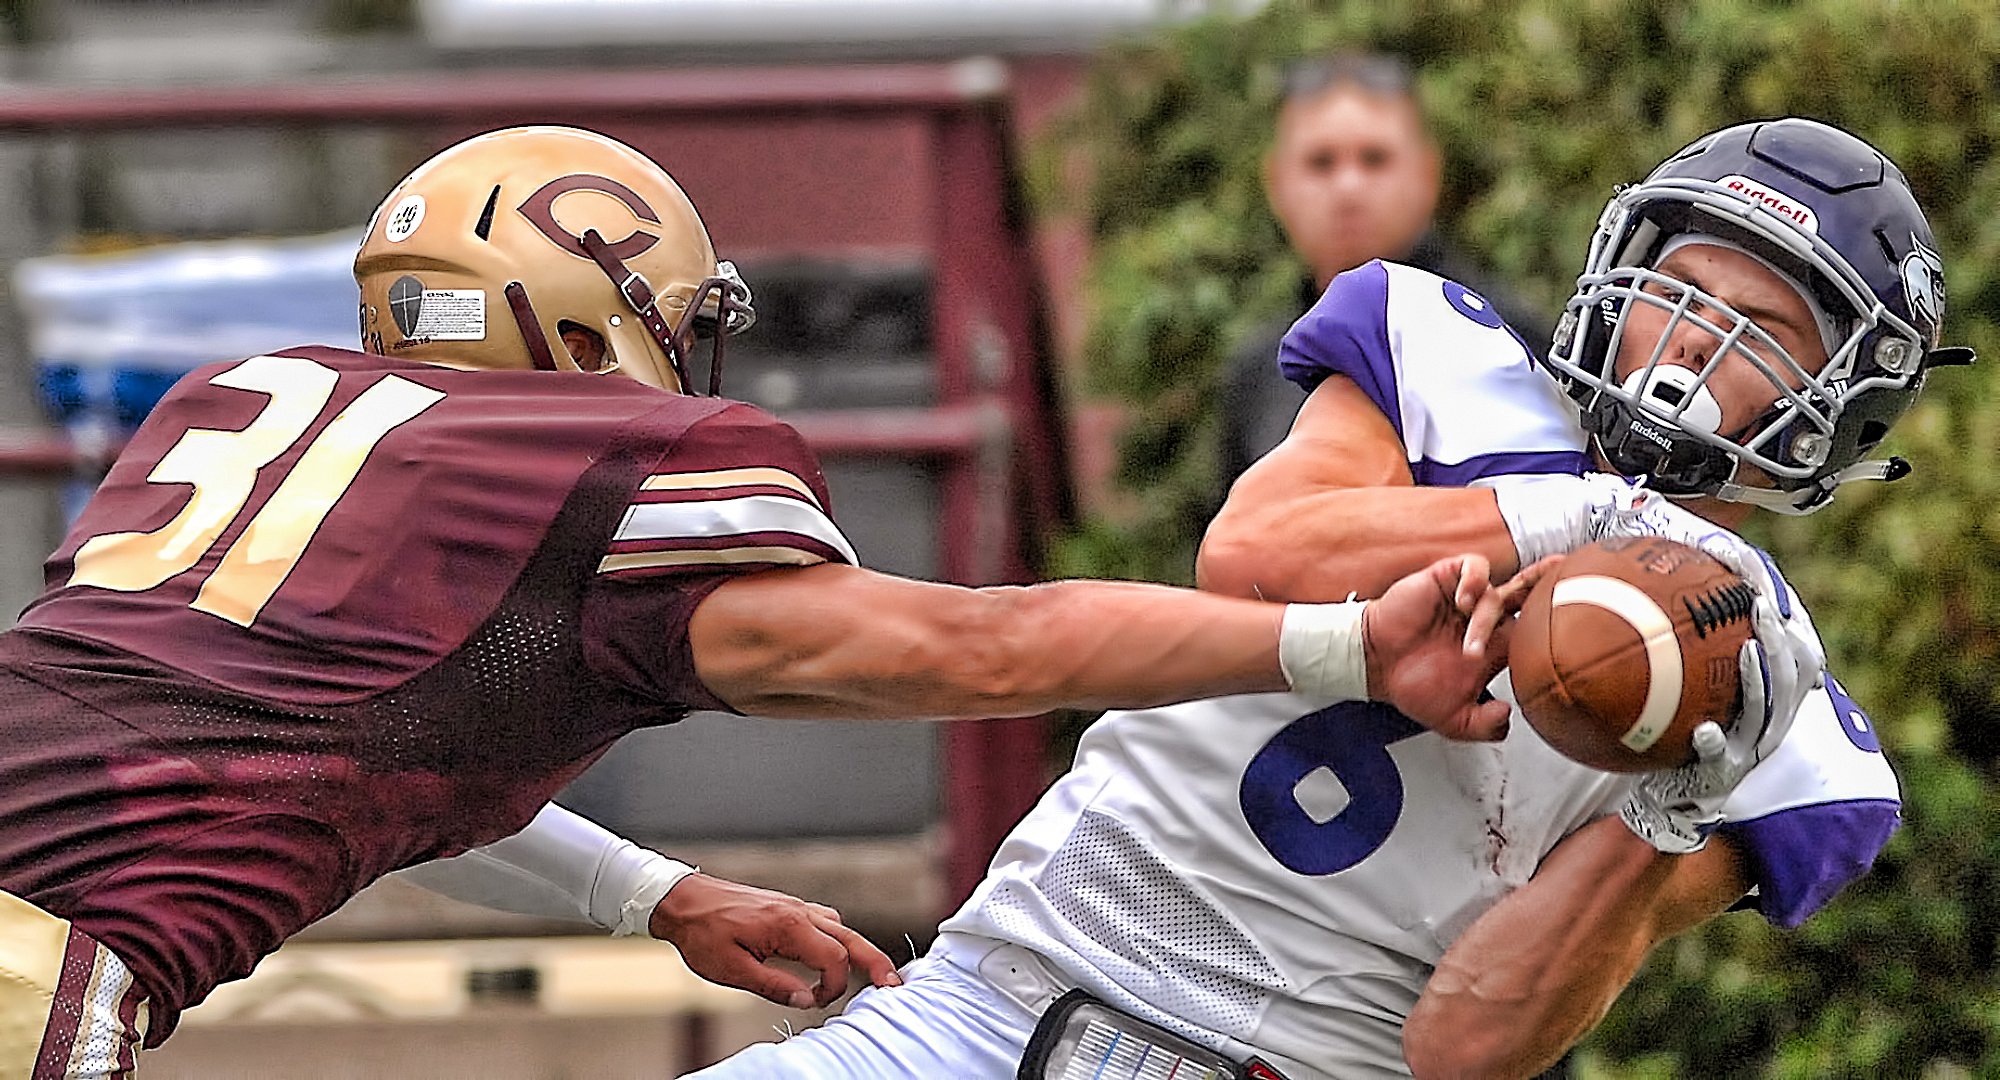 Senior defensive back Will Berning tips a pass away from a Wis.-Whitewater receiver in the Cobbers' home opener.